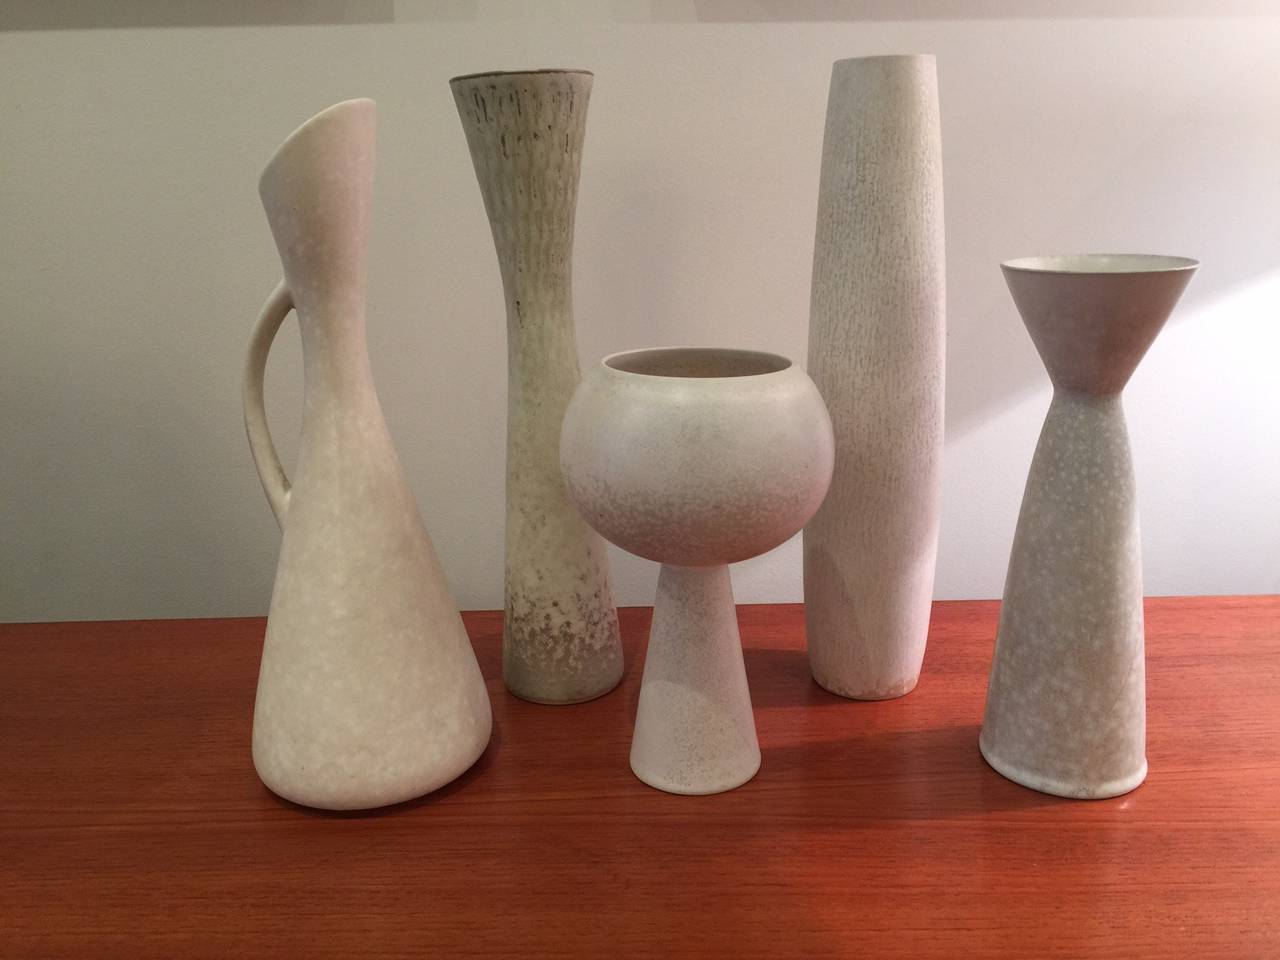 Collection of vases produced at Rörstrand porcelain factory in Sweden, circa 1950. By artists Gunnar Nylund and Carl Harry Stålhane in beautiful eggshell glazes. 

1. Vase by Gunnar Nylund for Rörstrand, Sweden, circa 1950, 11.75